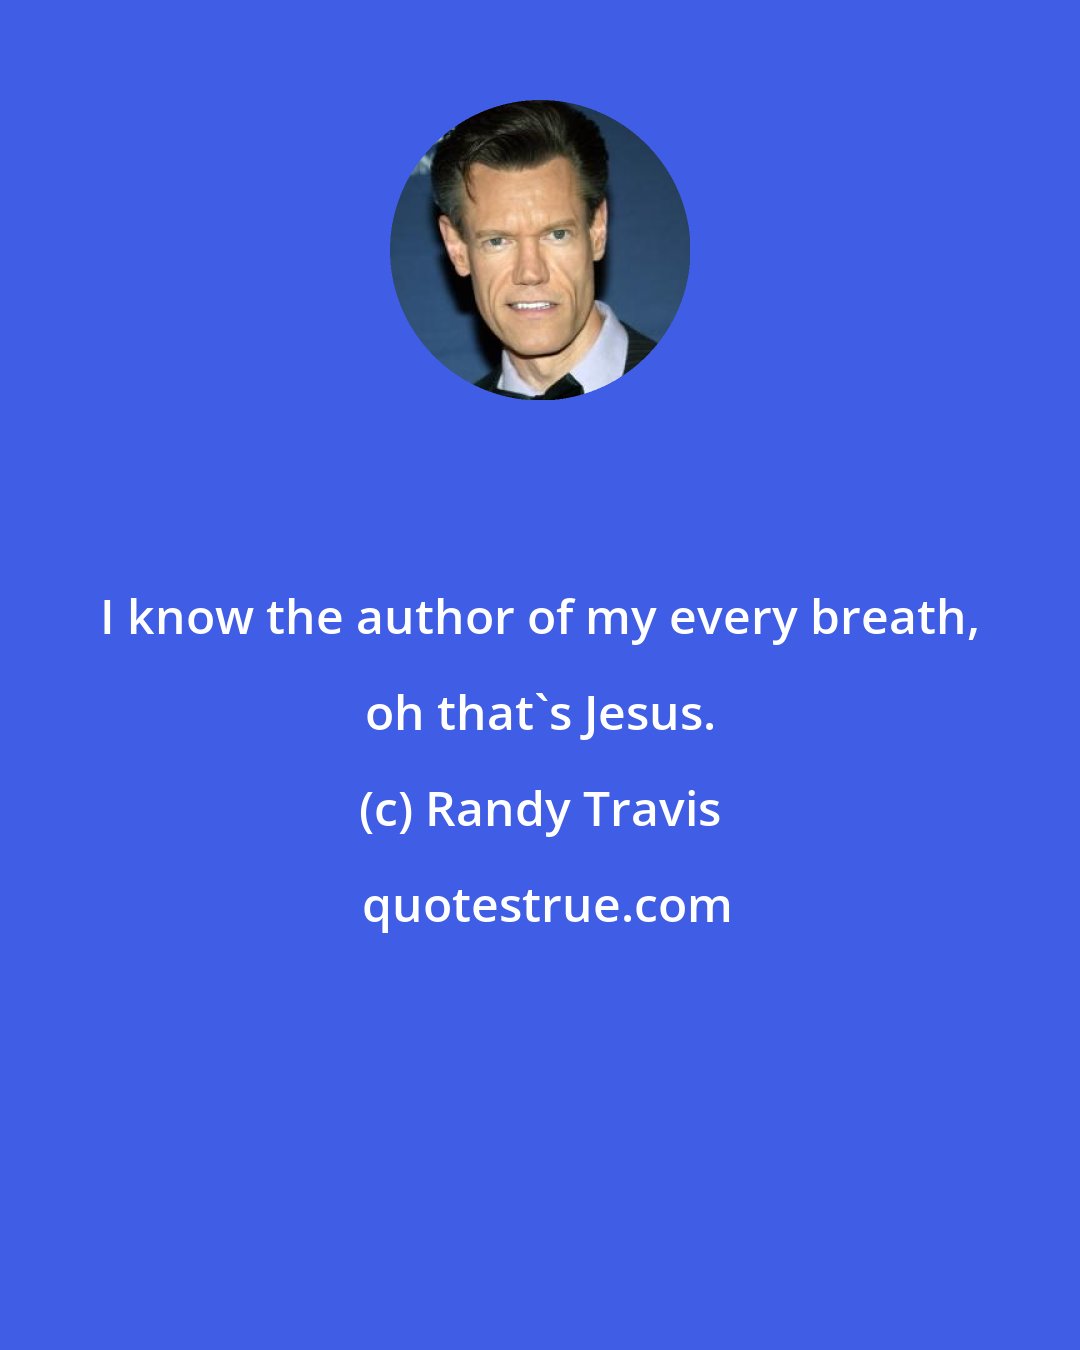 Randy Travis: I know the author of my every breath, oh that's Jesus.